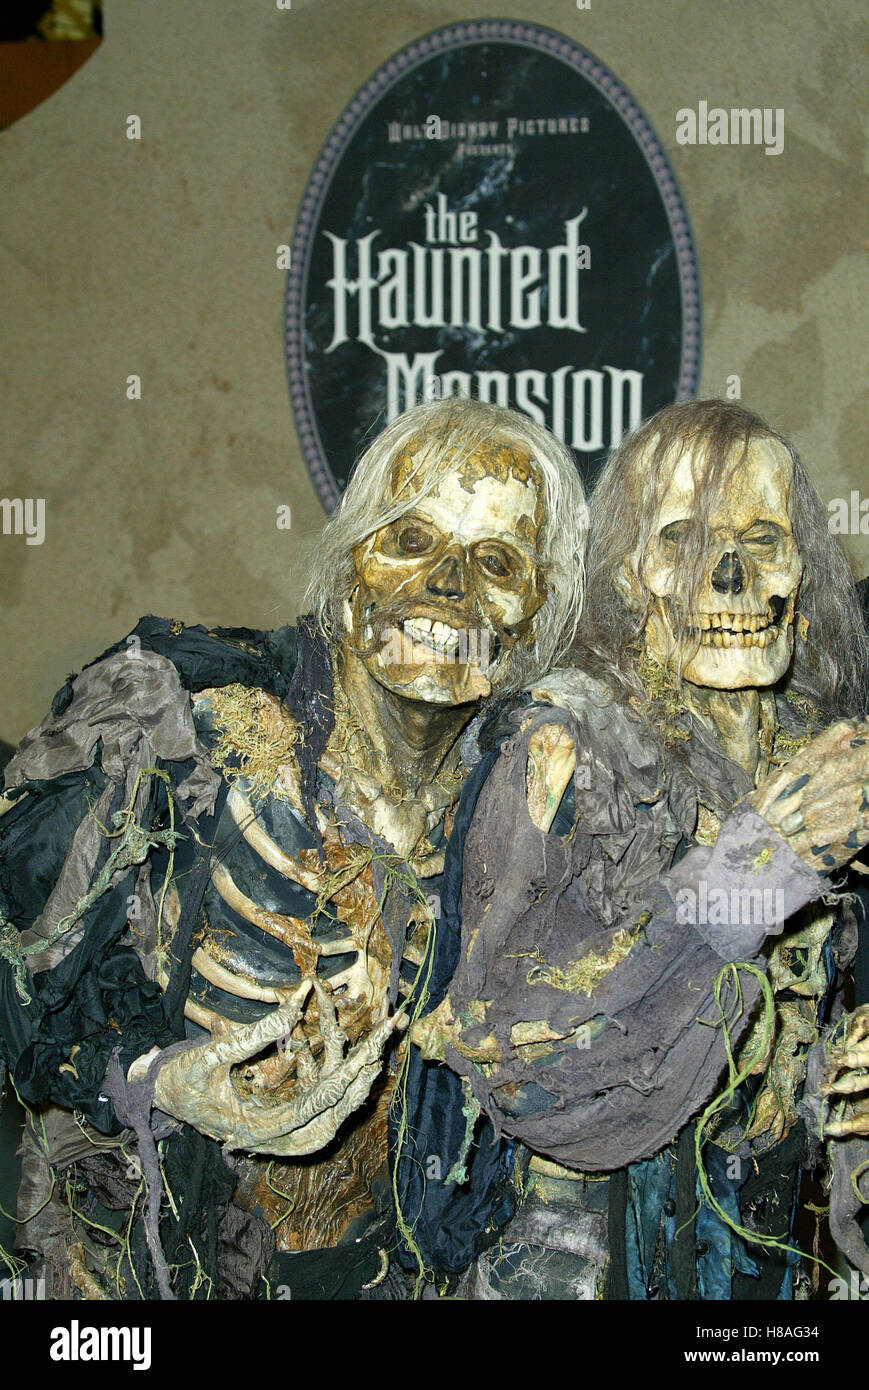 THE HAUNTED MANSION SKELETONS THE HAUNTED MANSION WORLD PRE HOLLYWOOD LOS ANGELES USA 23 November 2003 Stock Photo